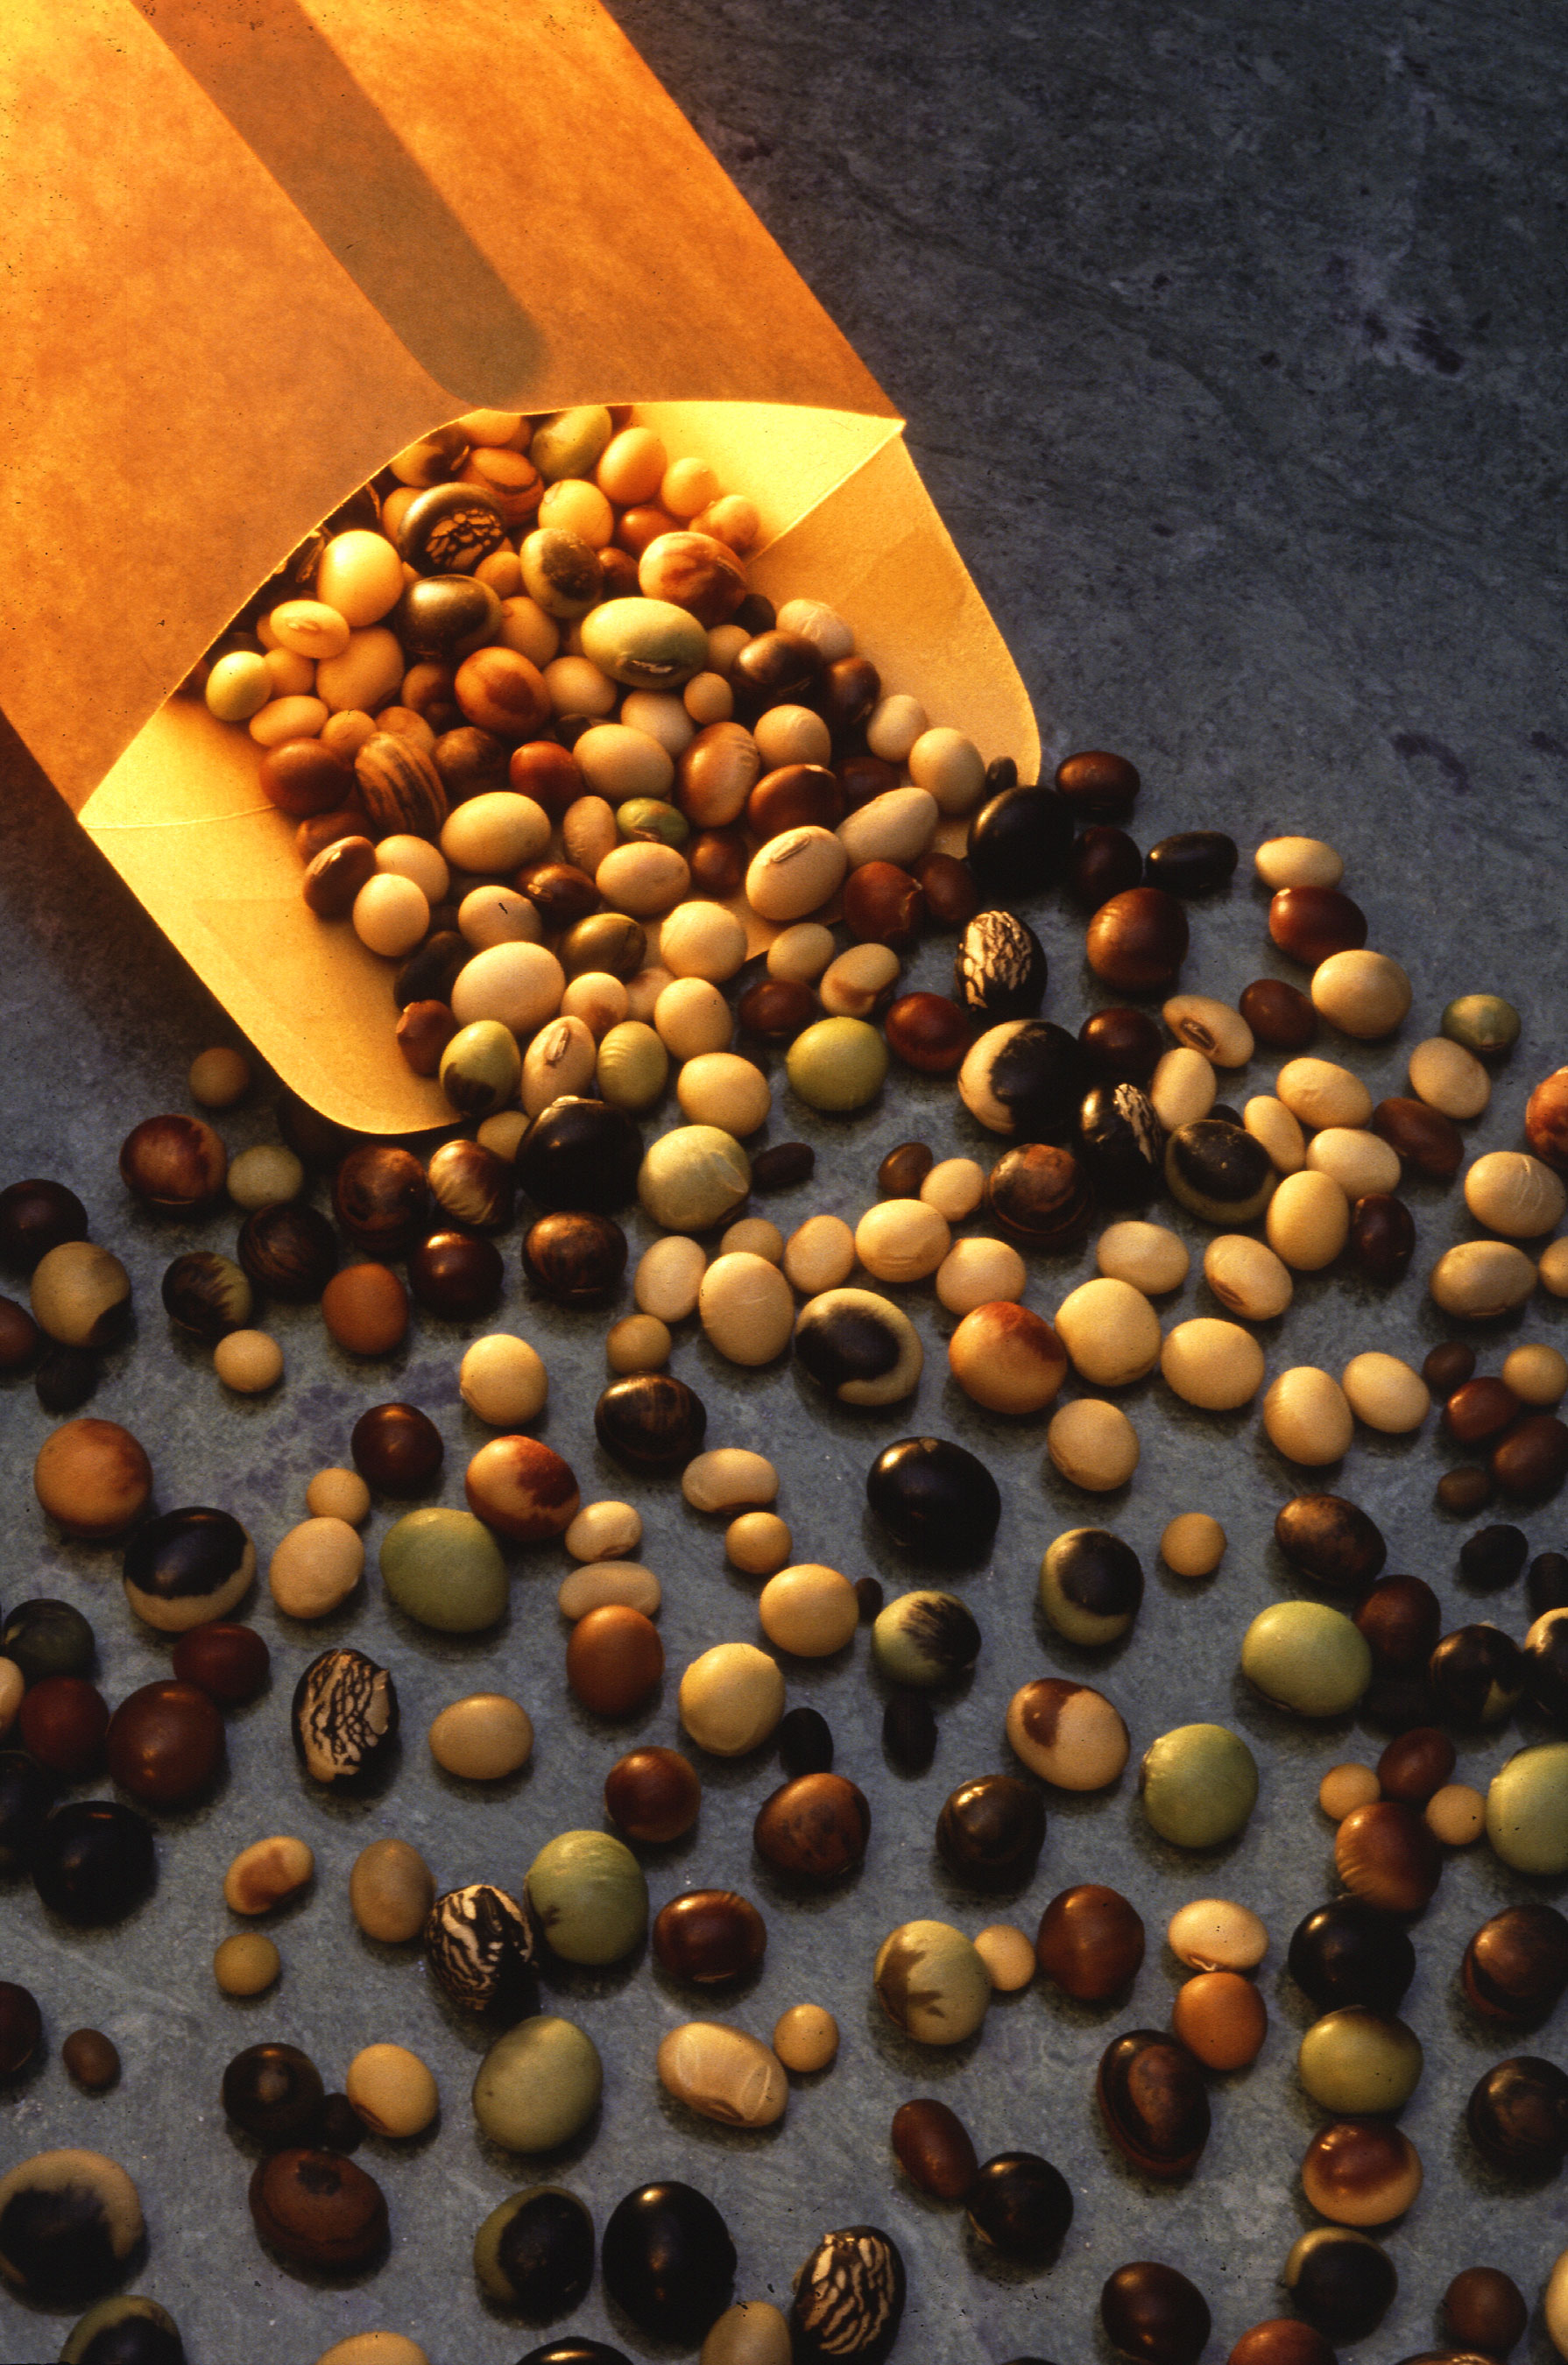 Soybeans are one of the best sources of leucine. By Scott Bauer (USDA Image Number K5267-7) [Public domain], via Wikimedia Commons